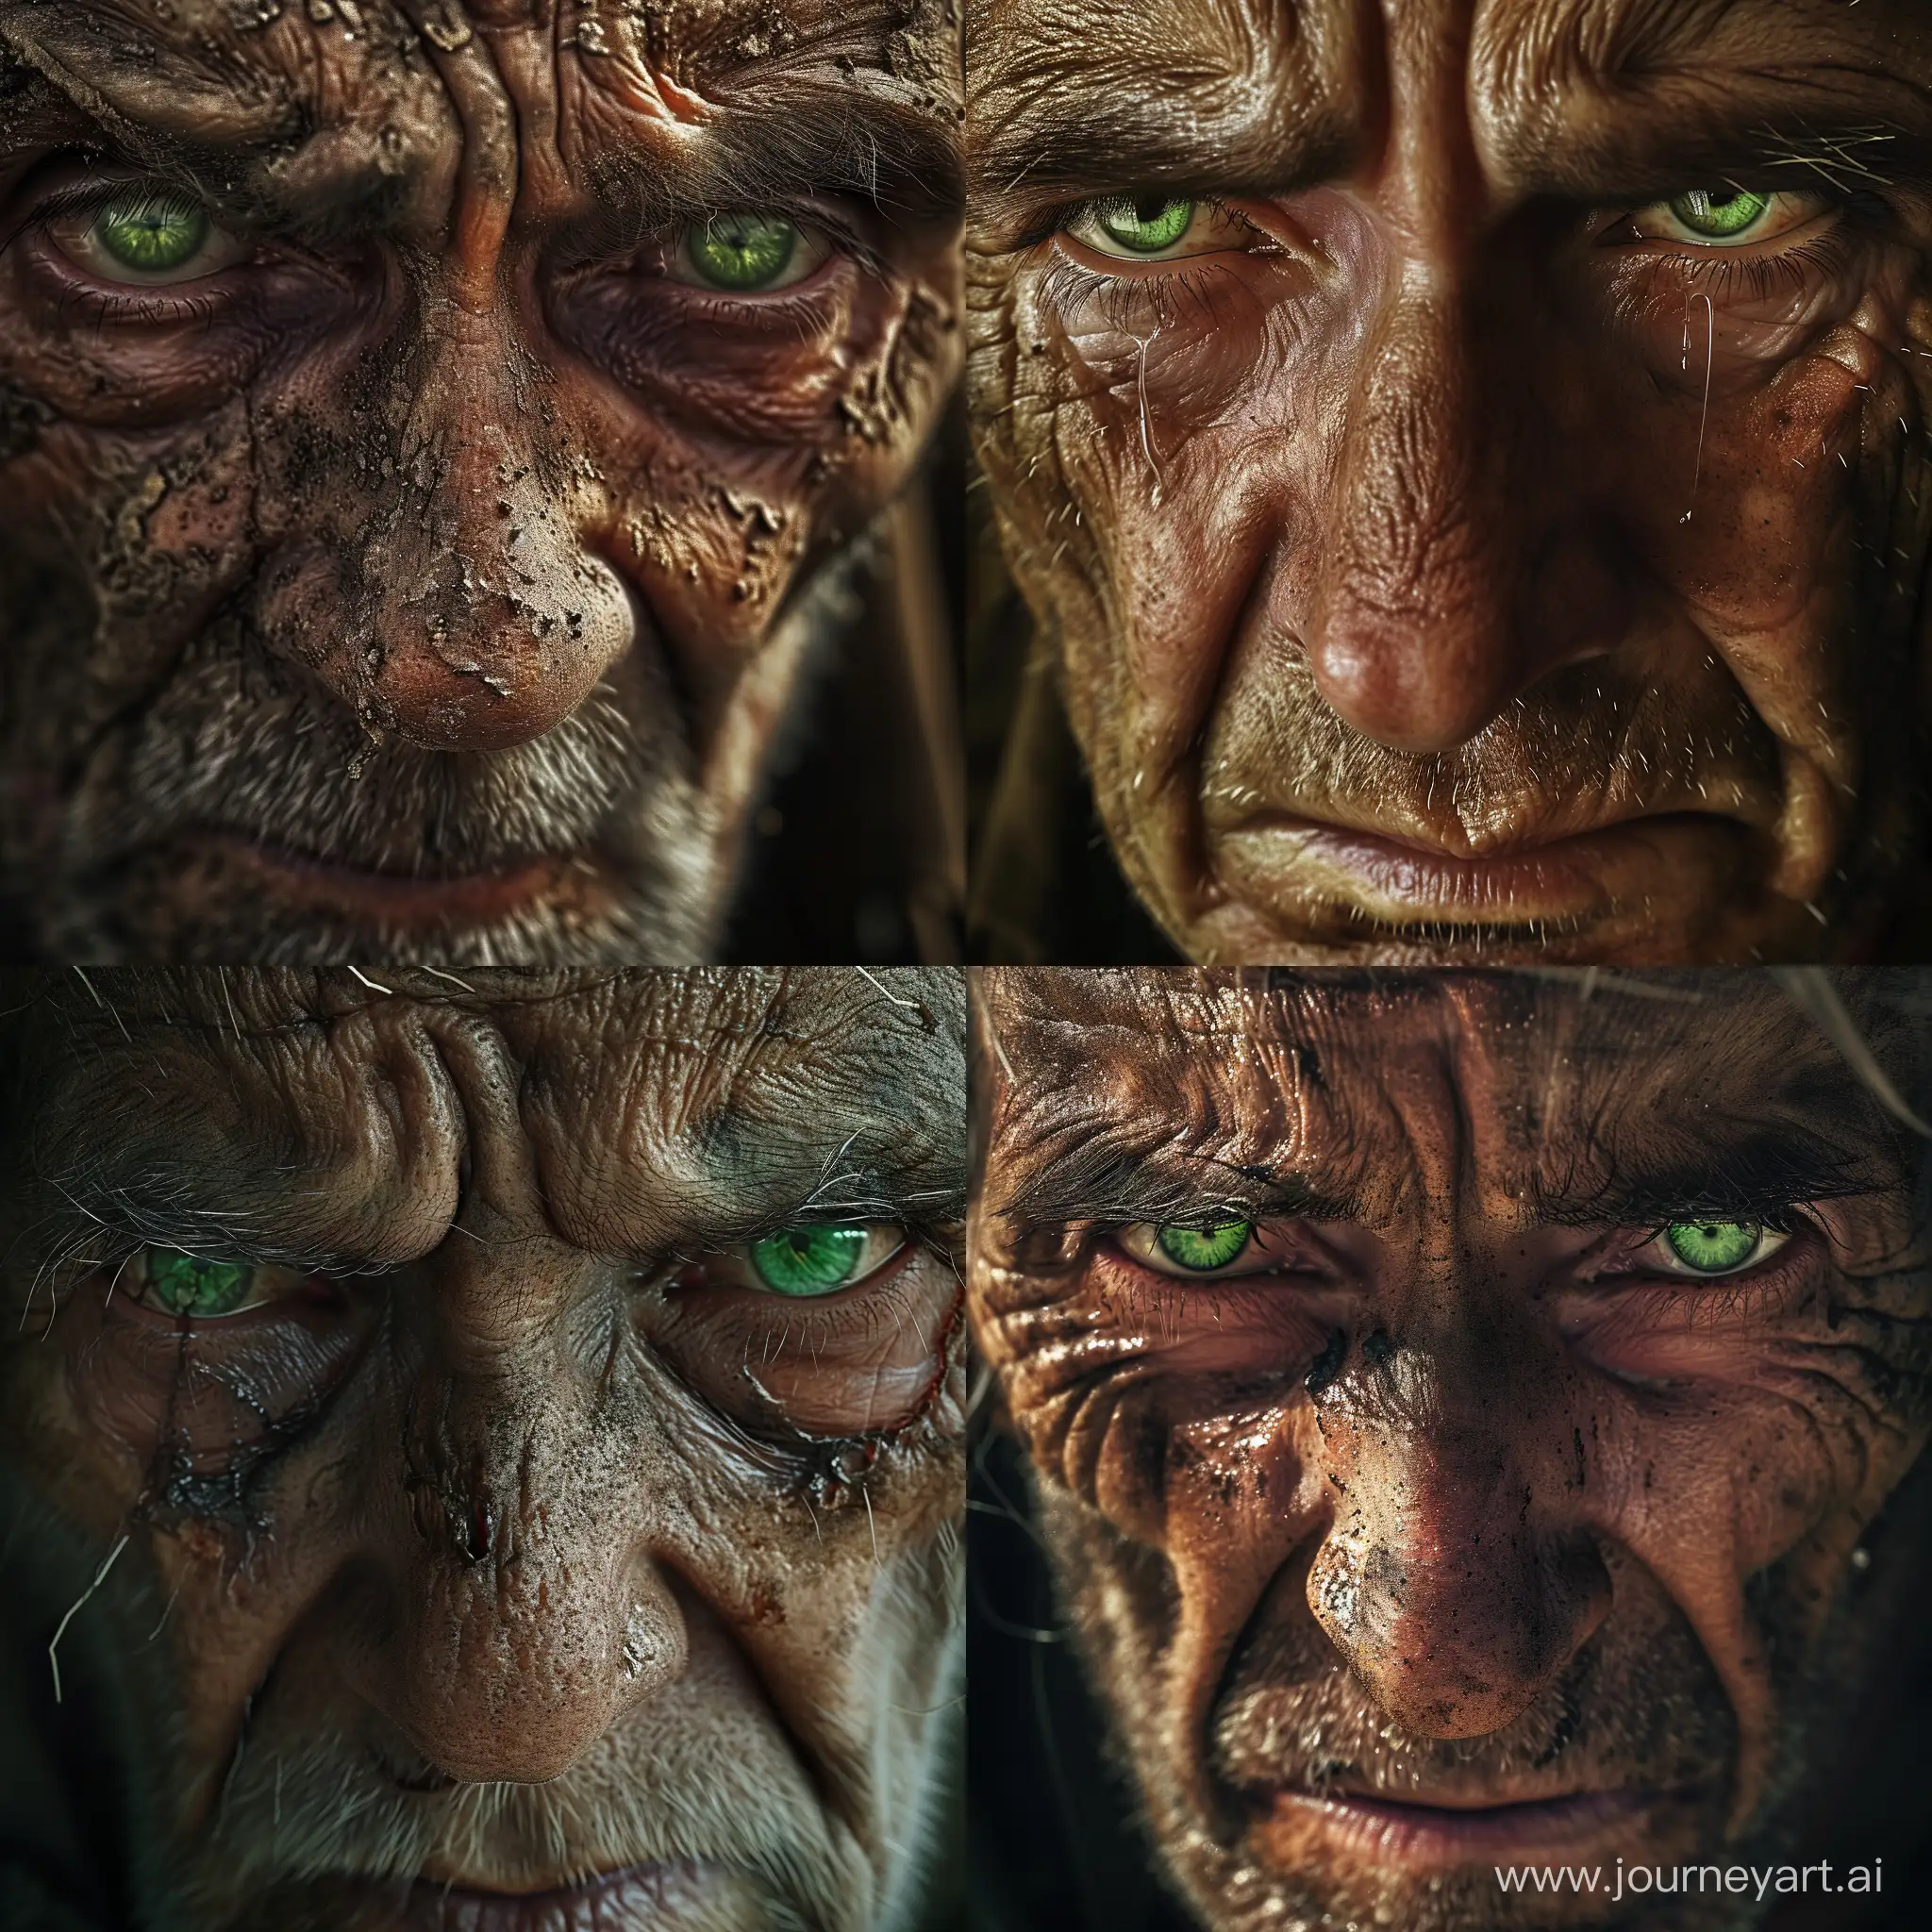 Emotive-CloseUp-Portrait-of-a-Homeless-Individual-with-Green-Teary-Eyes